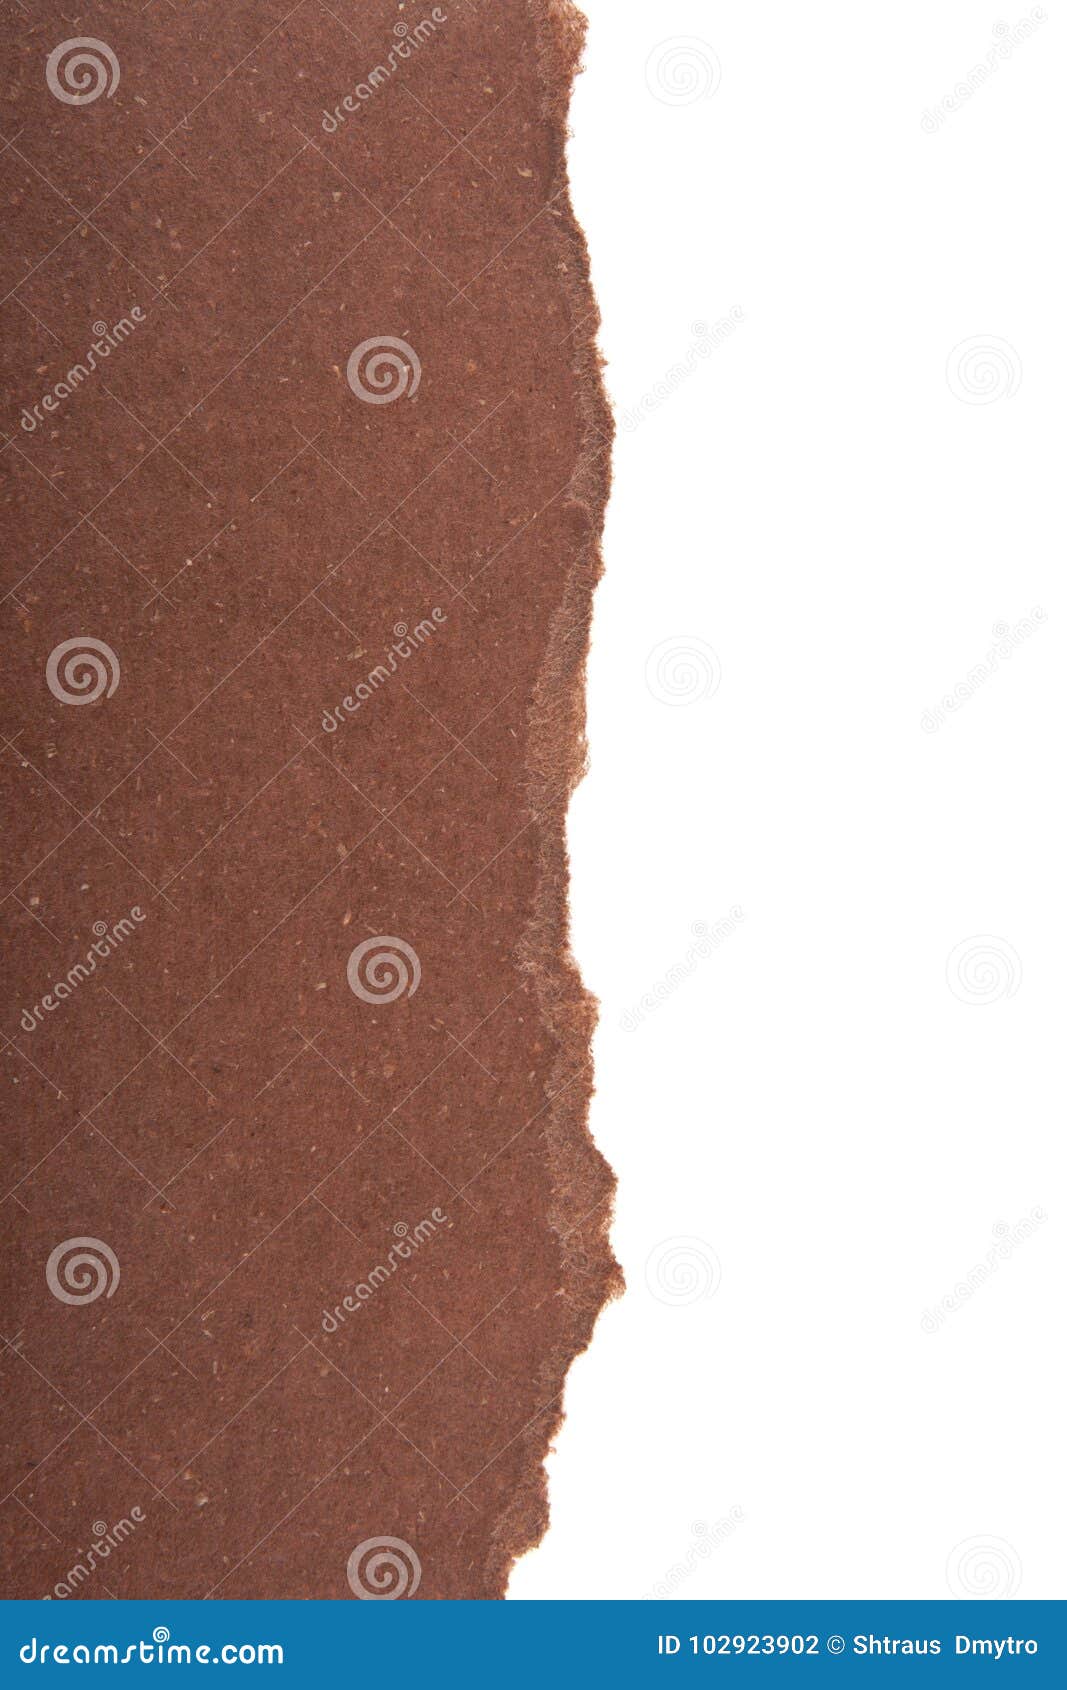 White Cardboard Texture Or Background Stock Photo, Picture and Royalty Free  Image. Image 32962559.